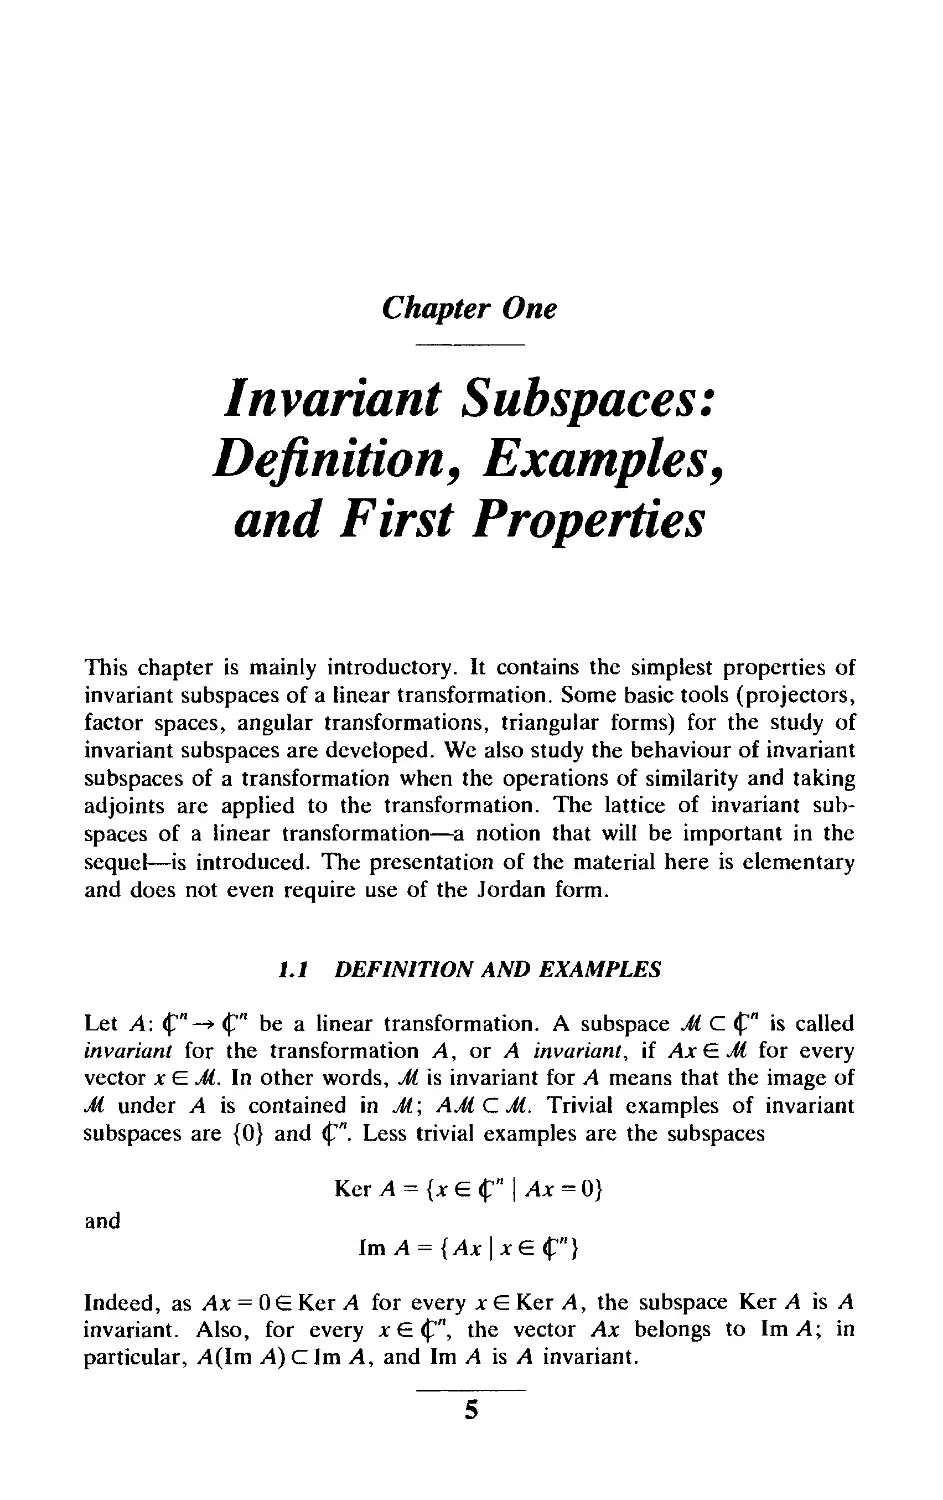 Chapter One Invariant Sub spaces: Definition, Examples, and First Properties